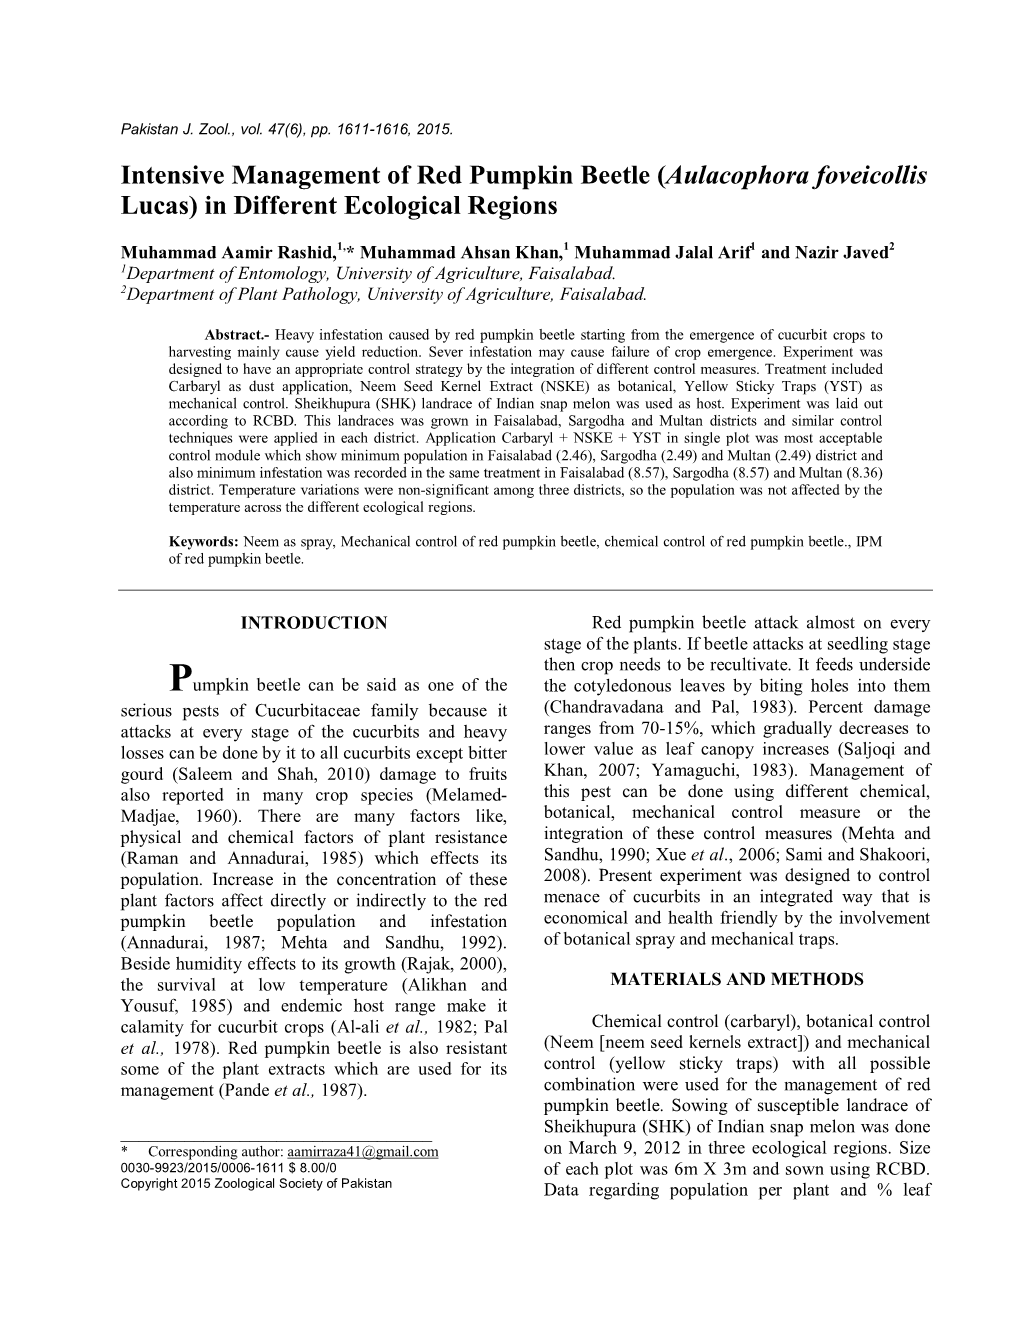 Intensive Management of Red Pumpkin Beetle (Aulacophora Foveicollis Lucas) in Different Ecological Regions